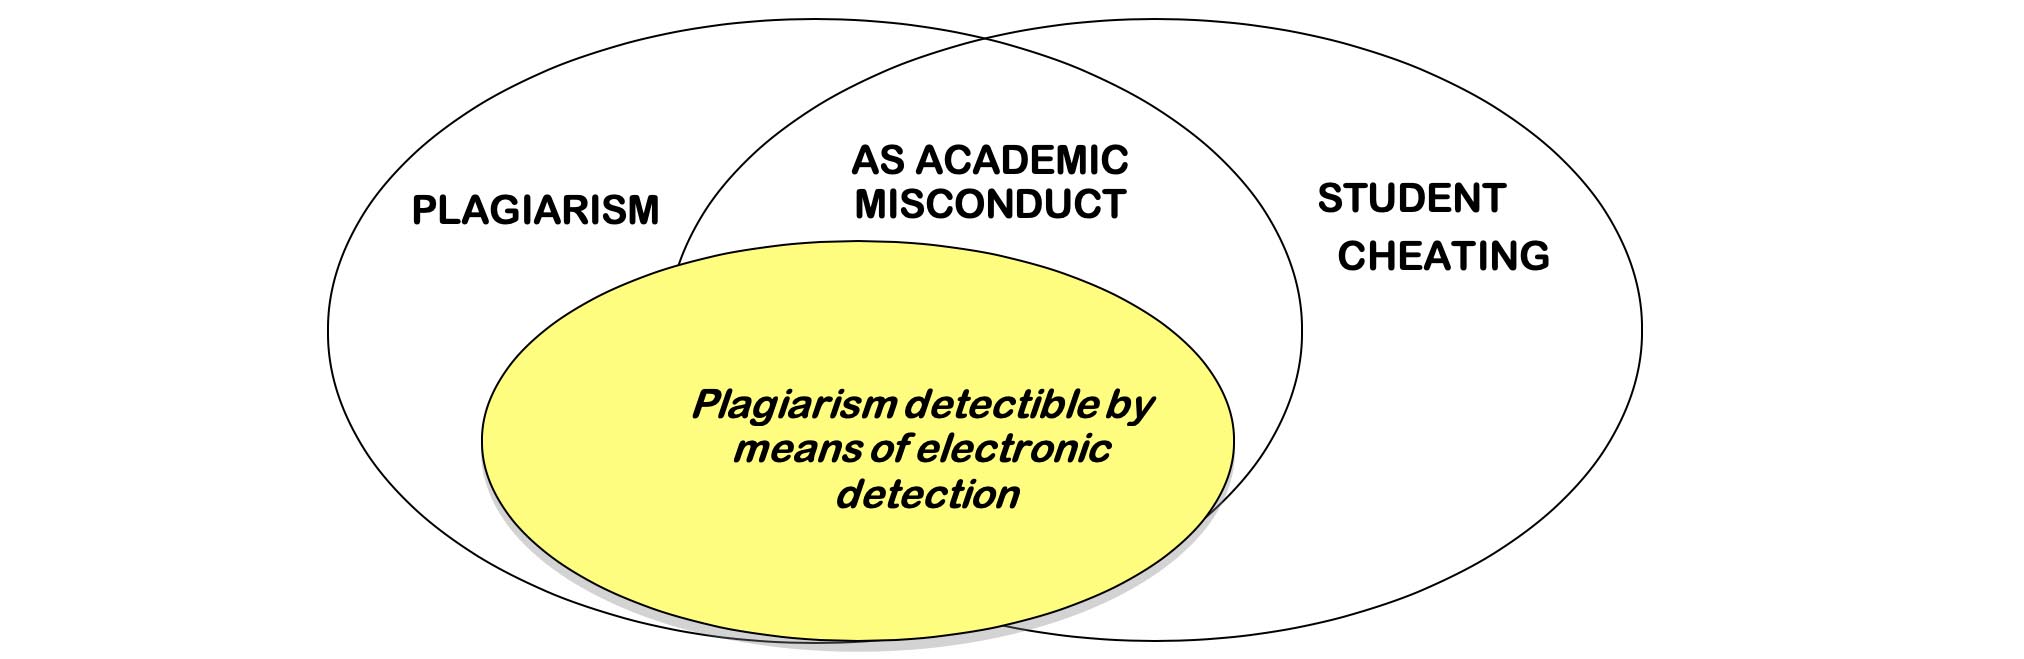 Plagiarism, as academic misconduct, student cheating.